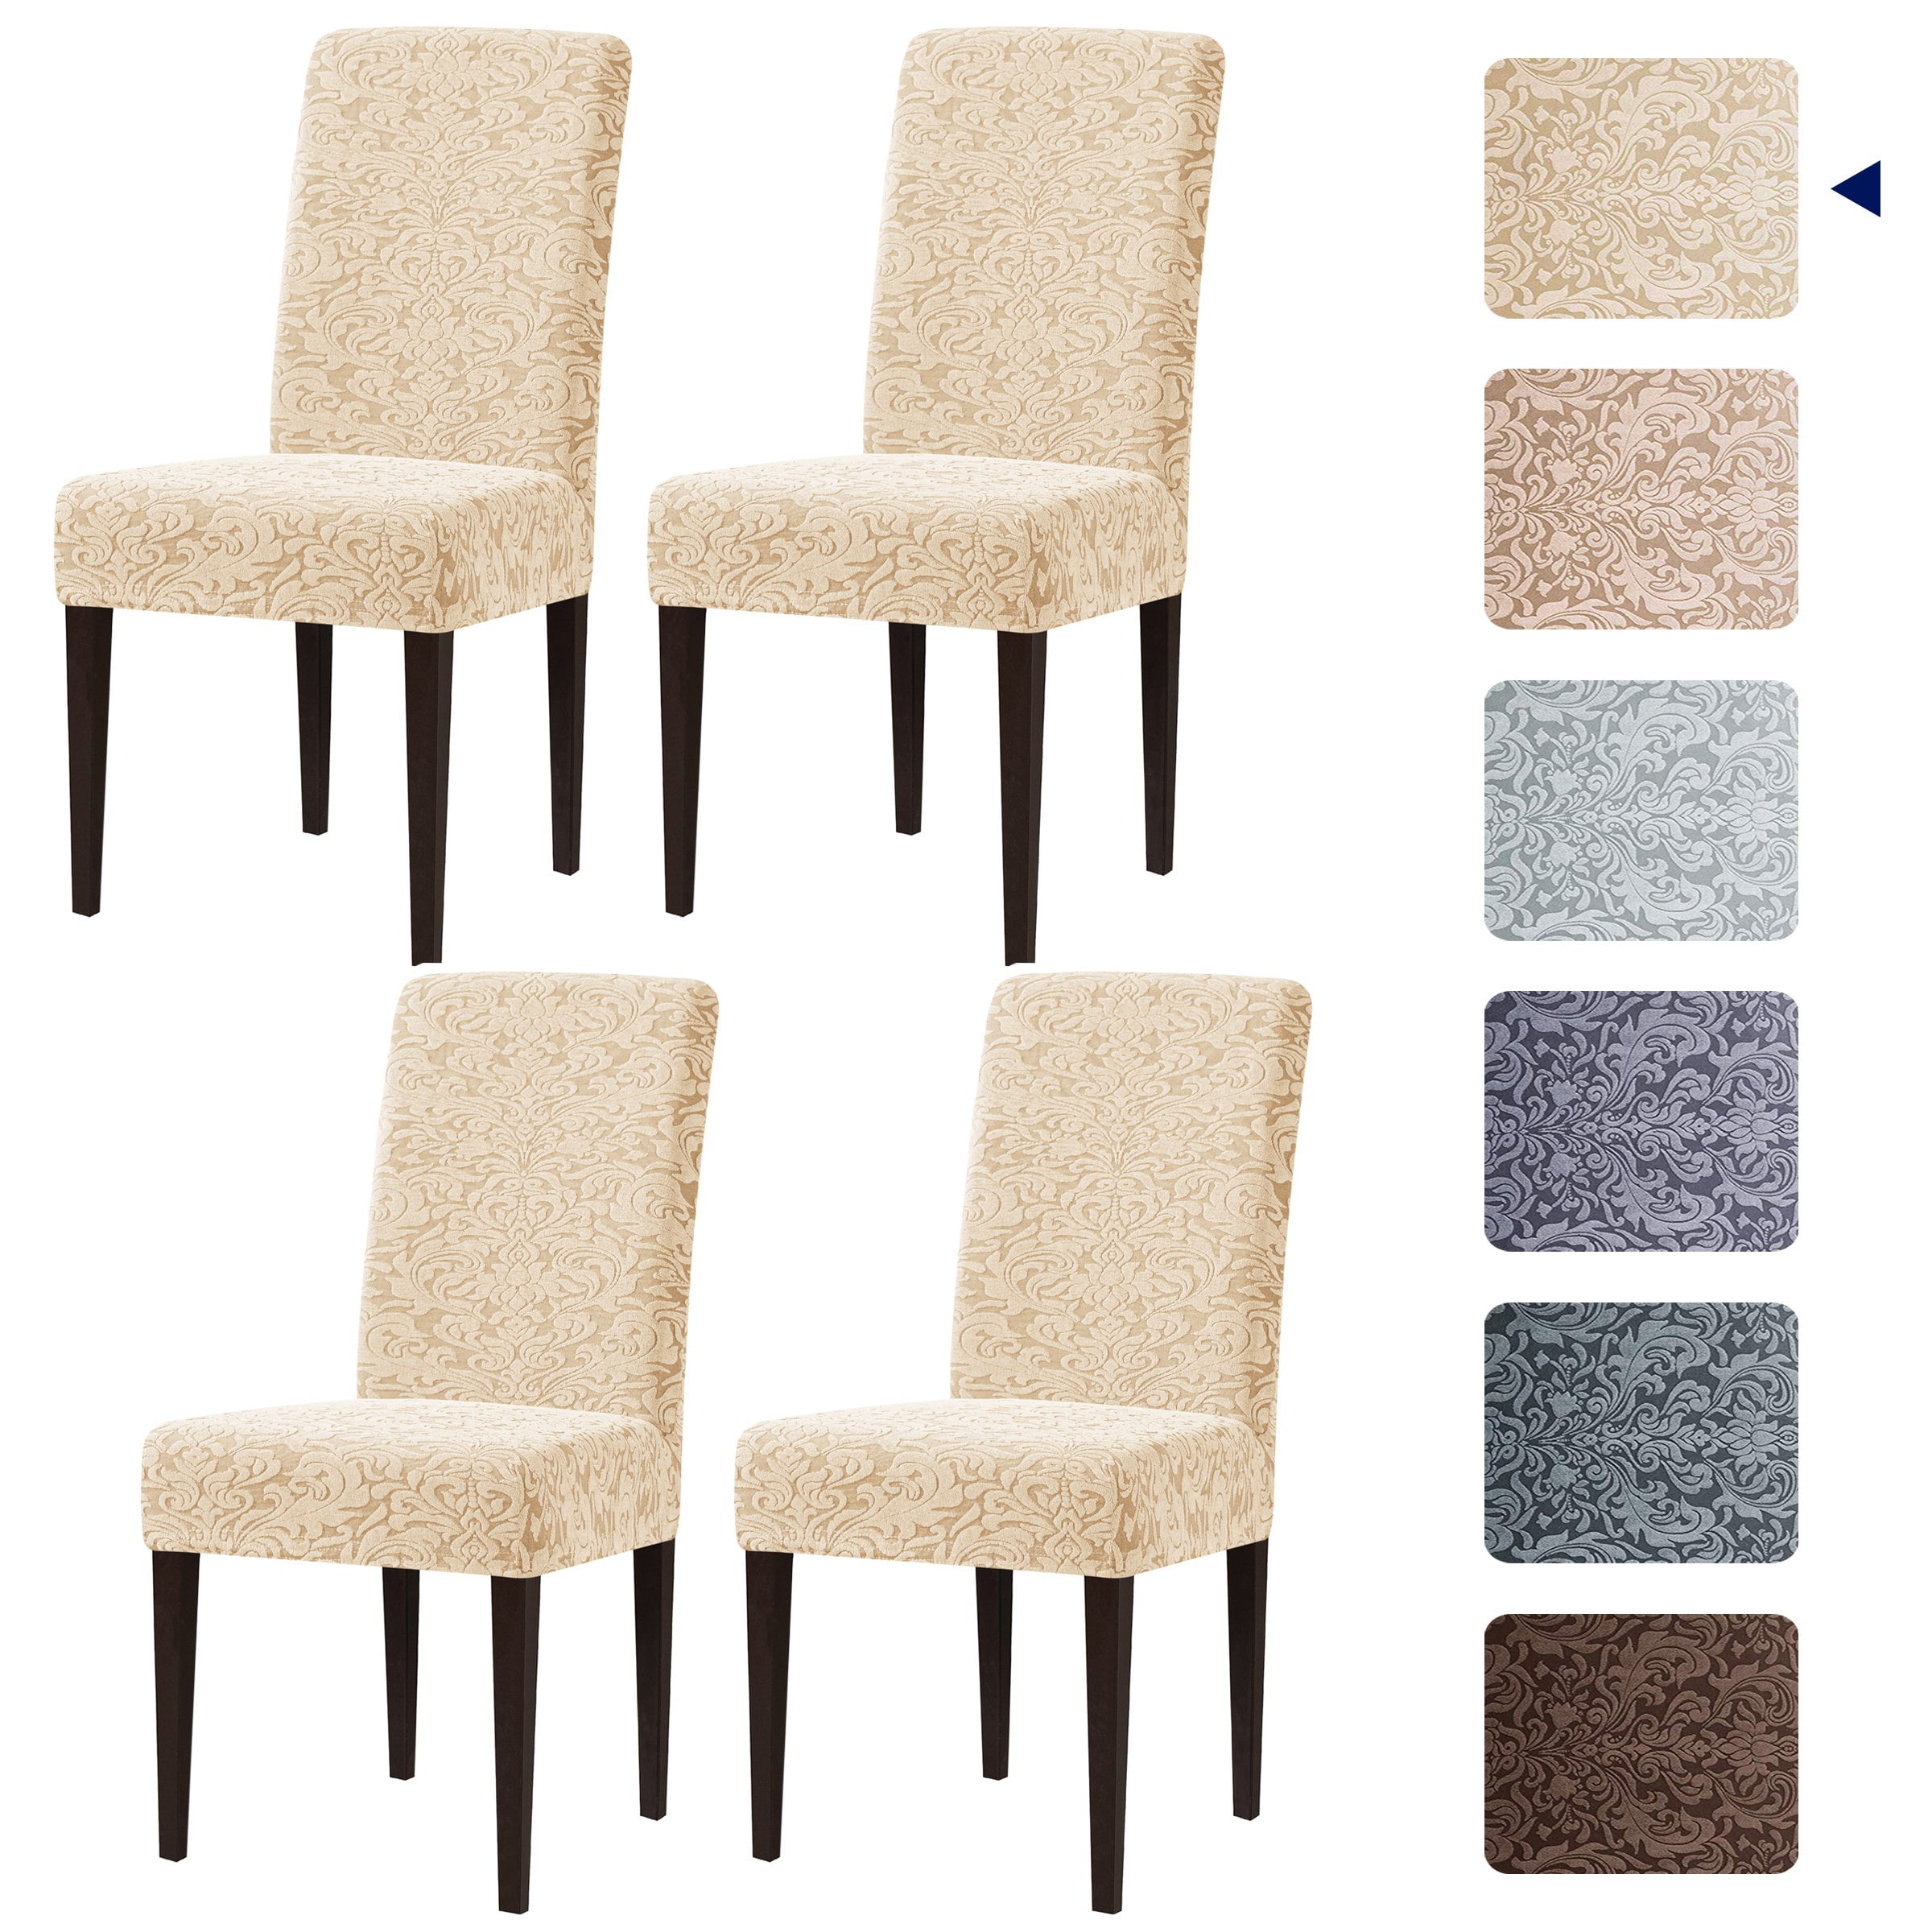 Subrtex Dining Chair Slipcovers, Damask Dining Chair Slipcovers